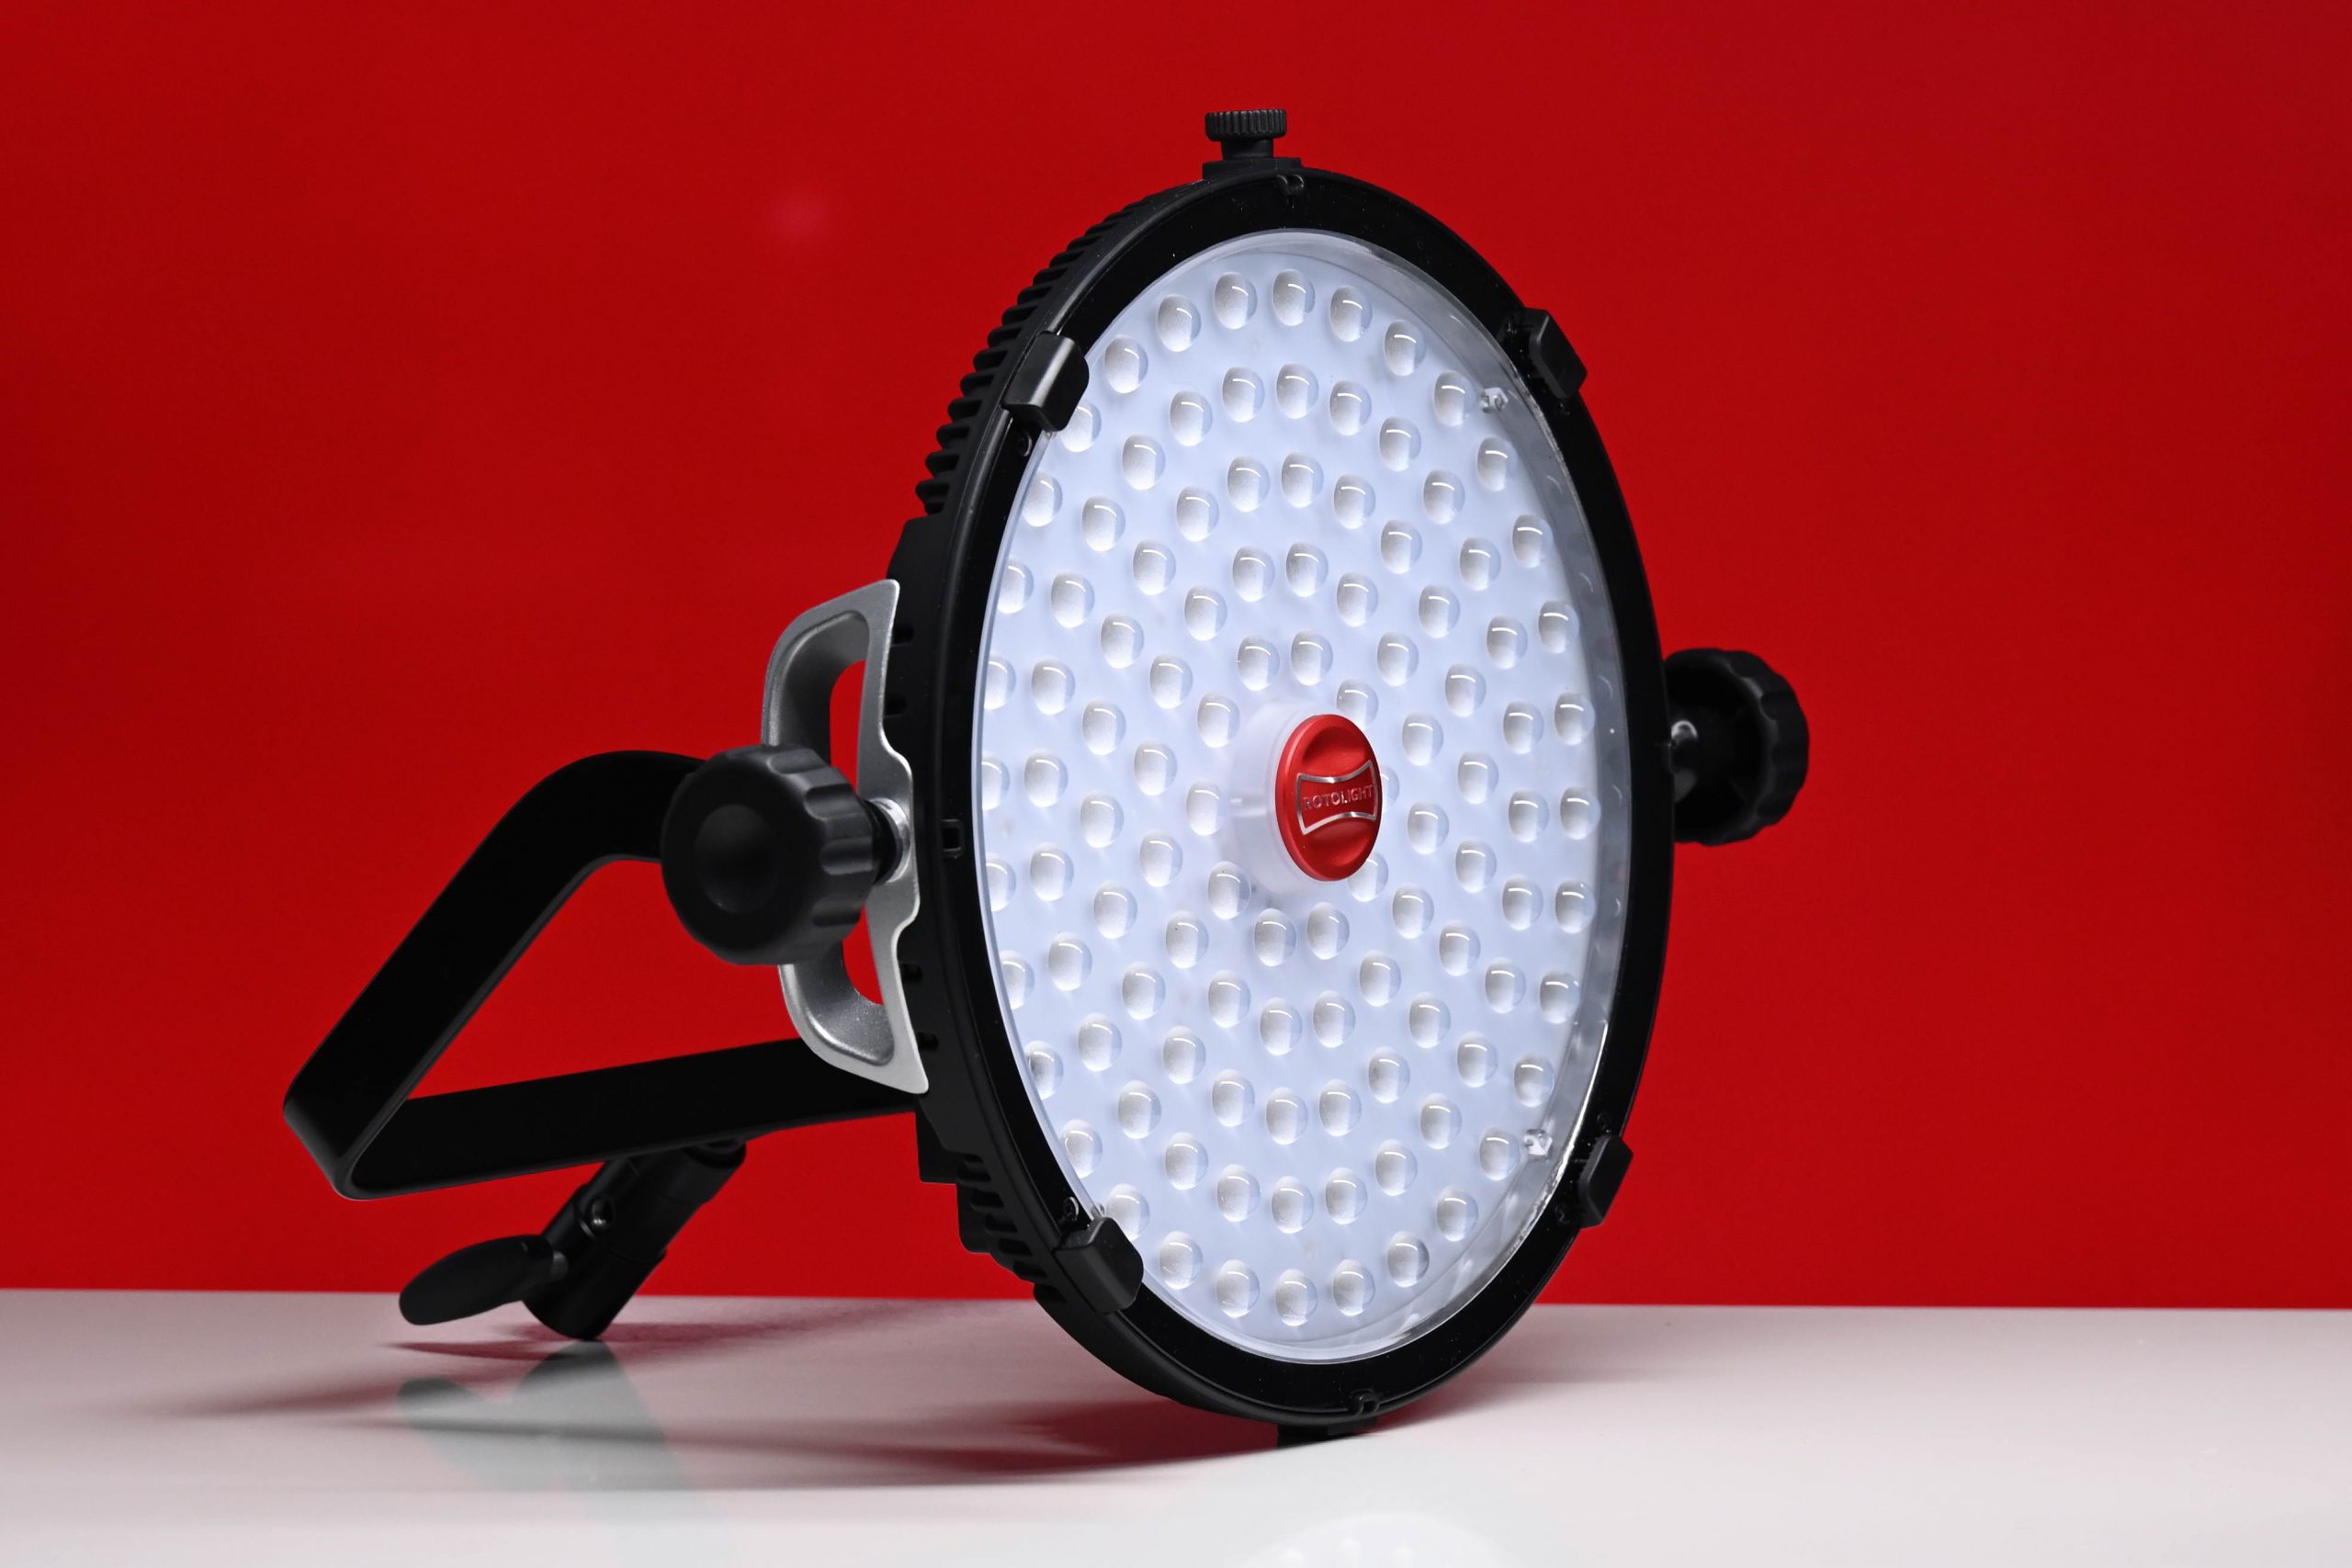 Review: Rotolight AEOS 2 and NEO 3 lights use RGB LEDs to offer